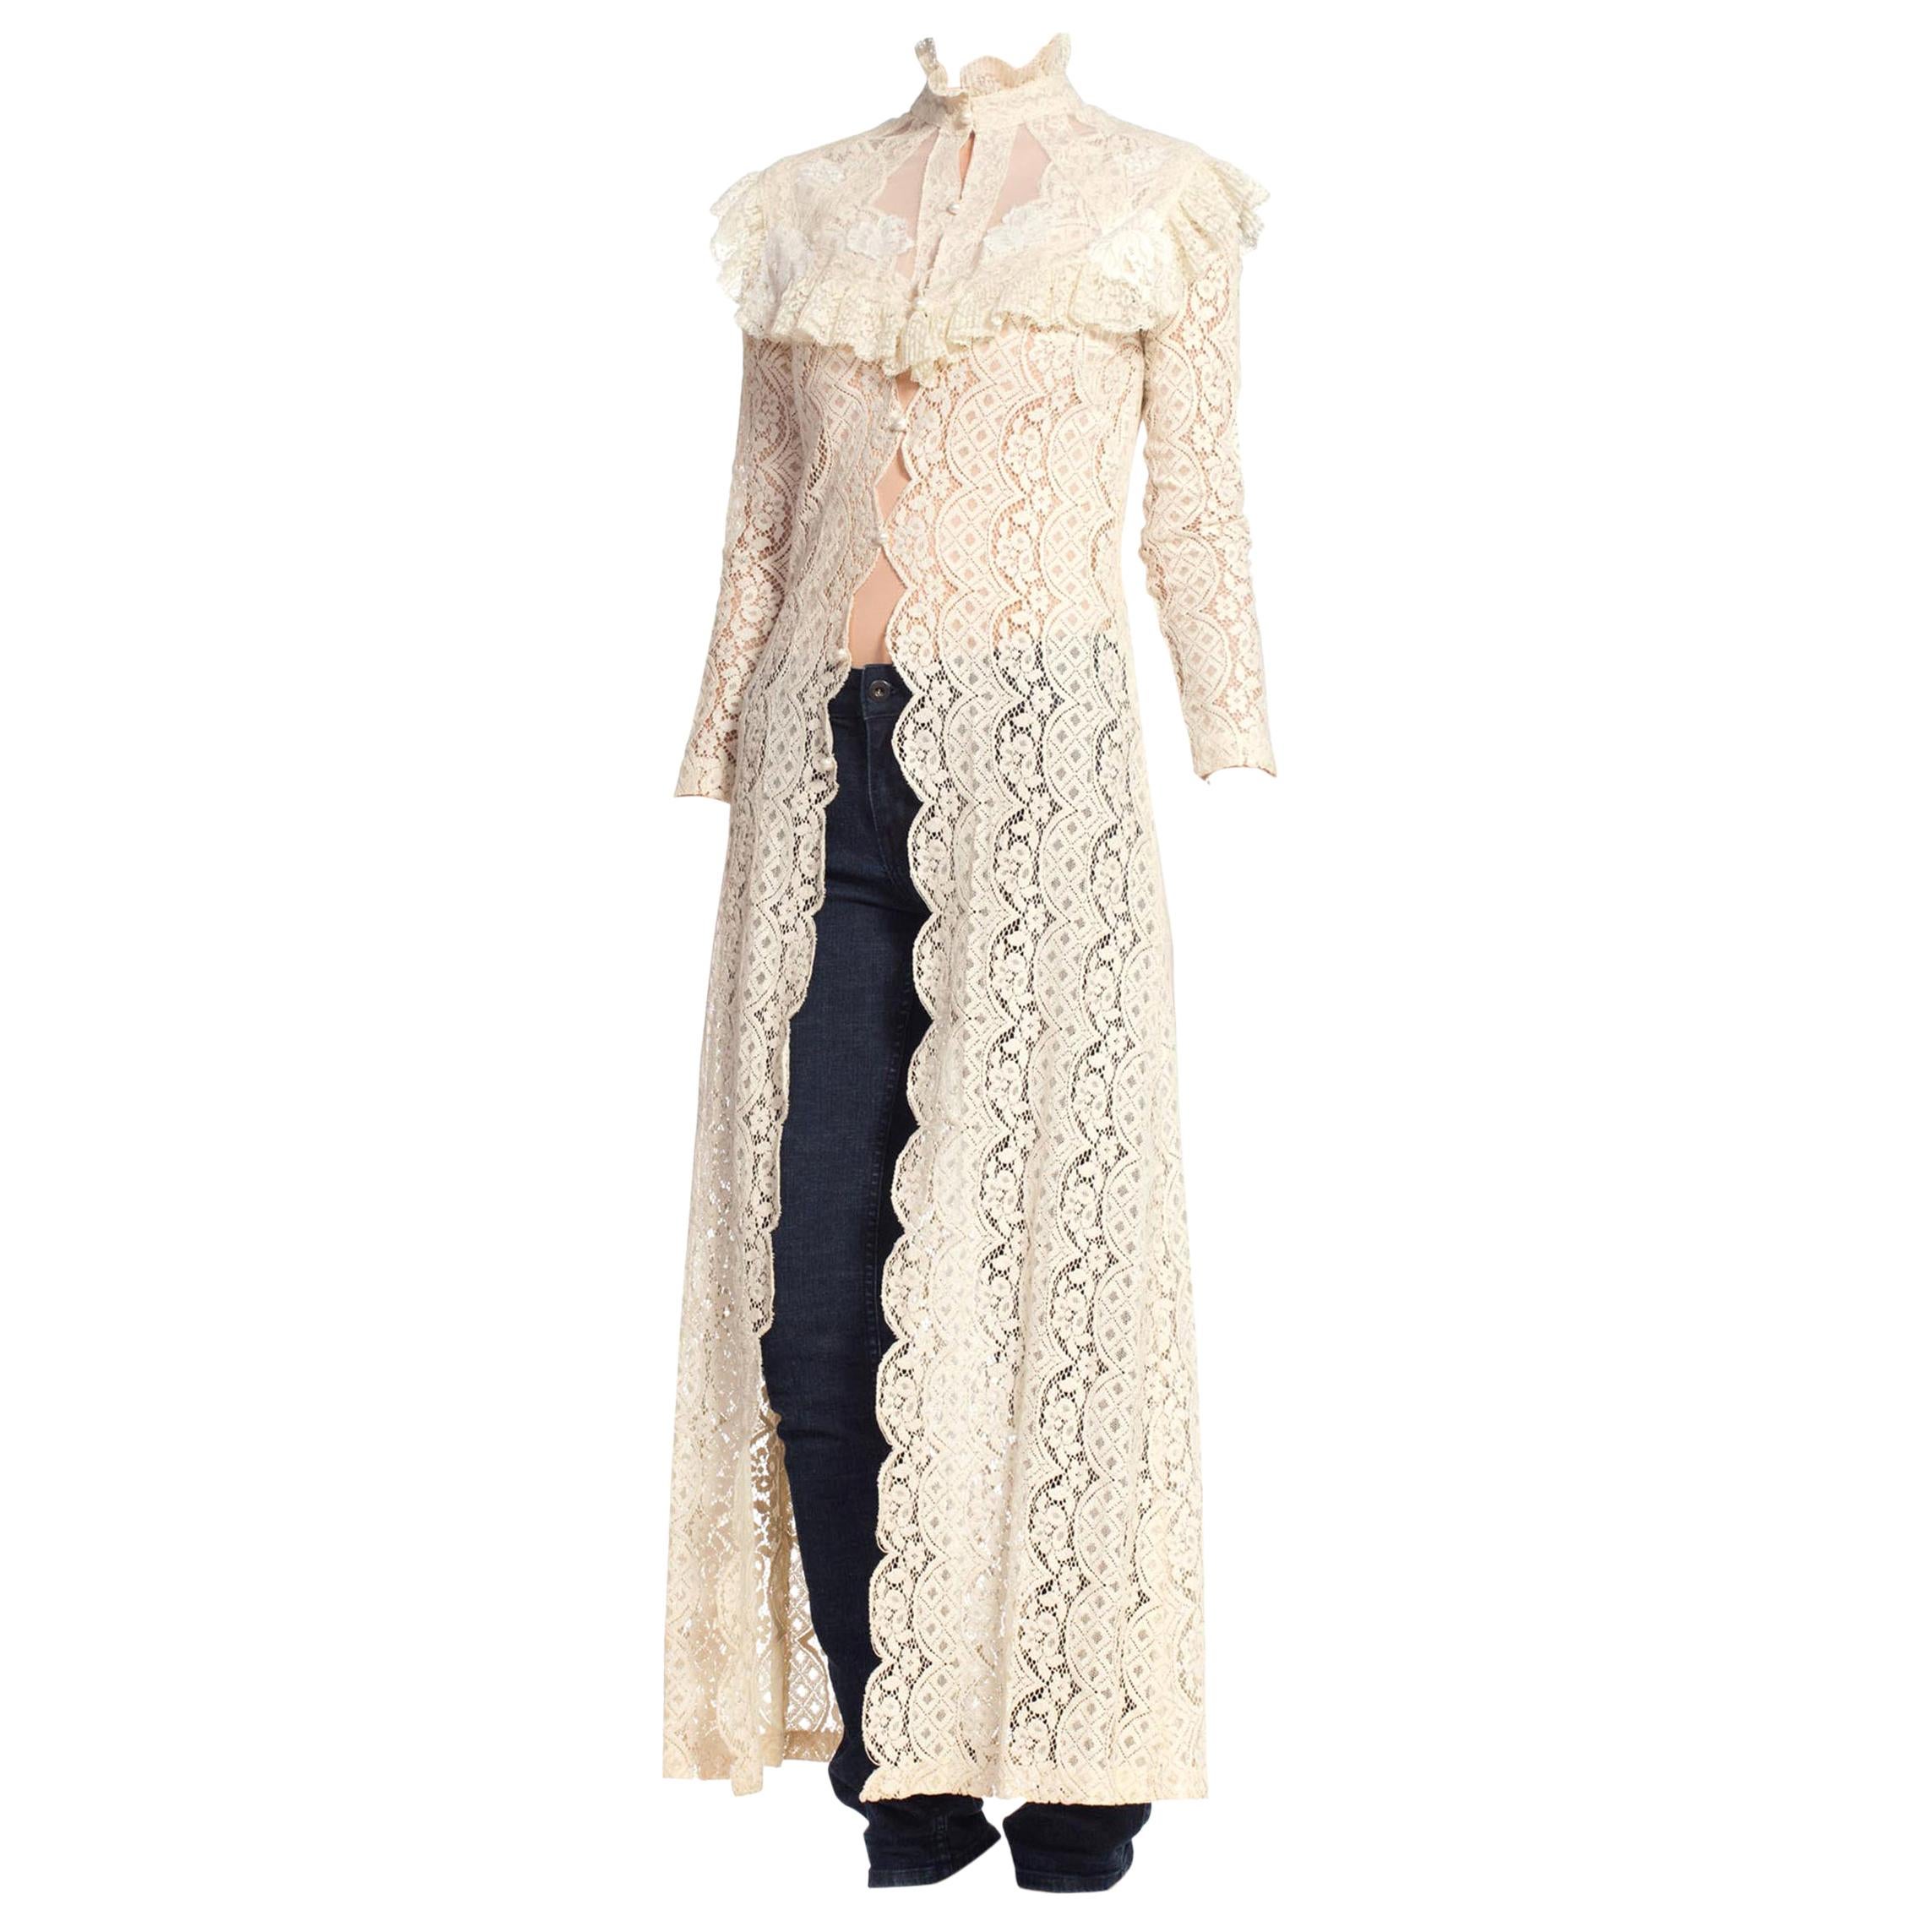 1970'S Ivory Cotton Lace Victorian Revival Duster Dress